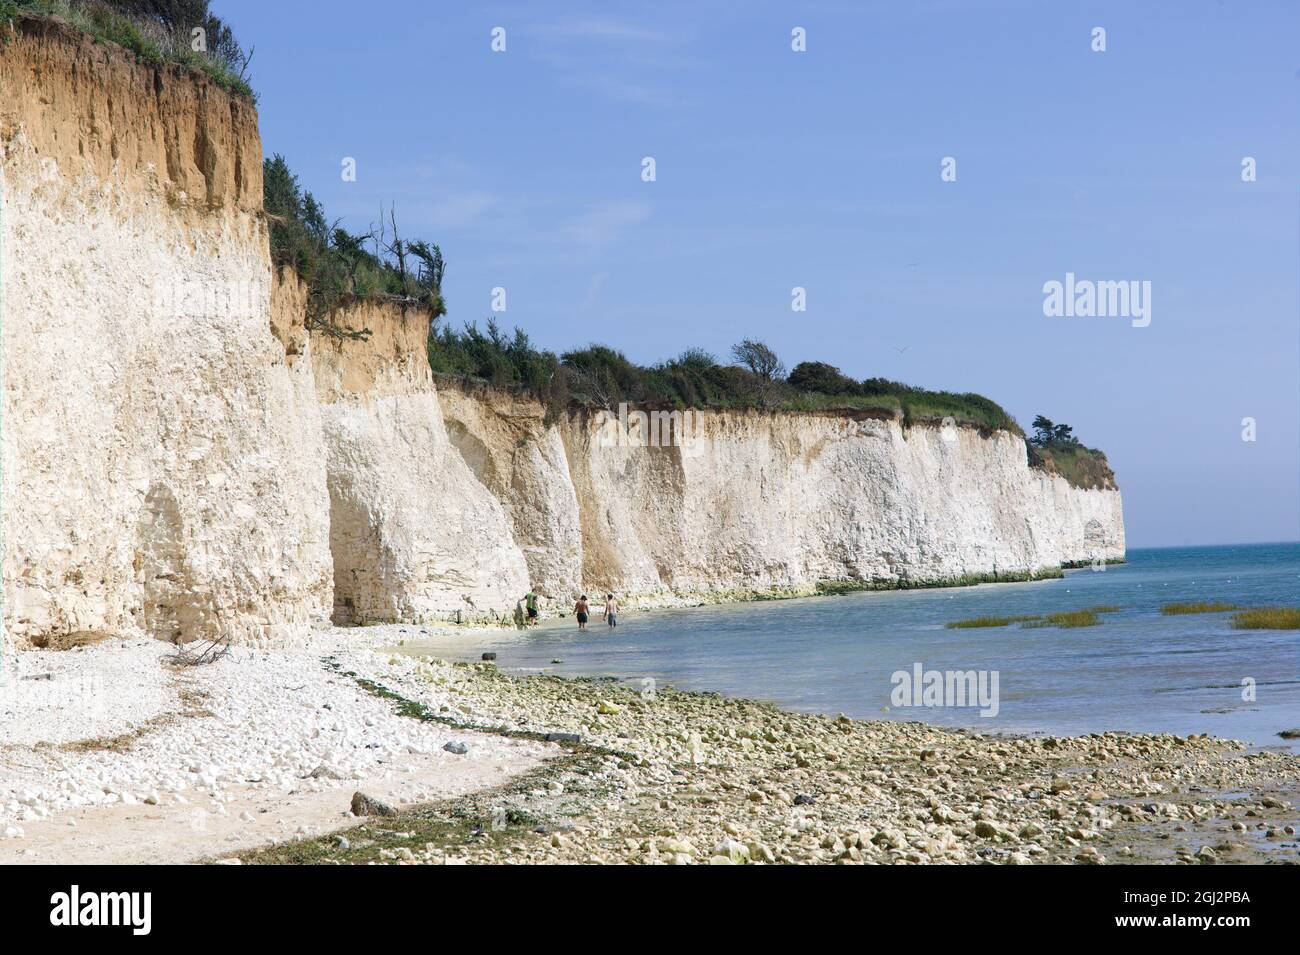 Travel Britain - View of Chalk Cliff face dating from Palaeocene and beautiful secluded cove at Pegwell Bay, Kent, Britain . Stock Photo